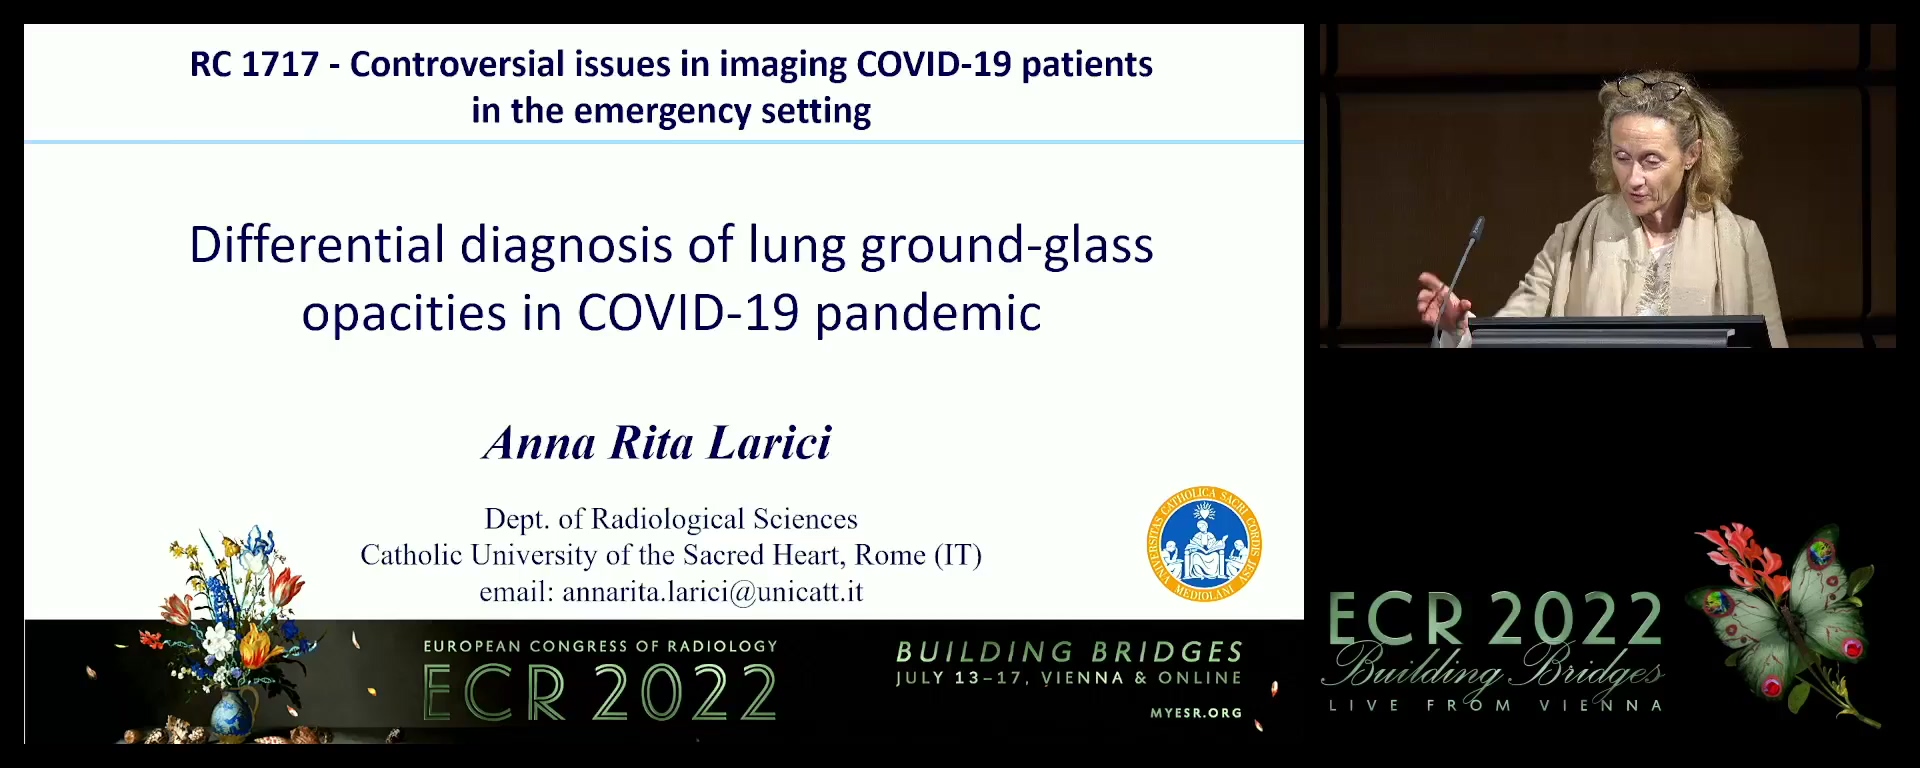 Differential diagnosis of lung ground-glass opacities in COVID-19 pandemic